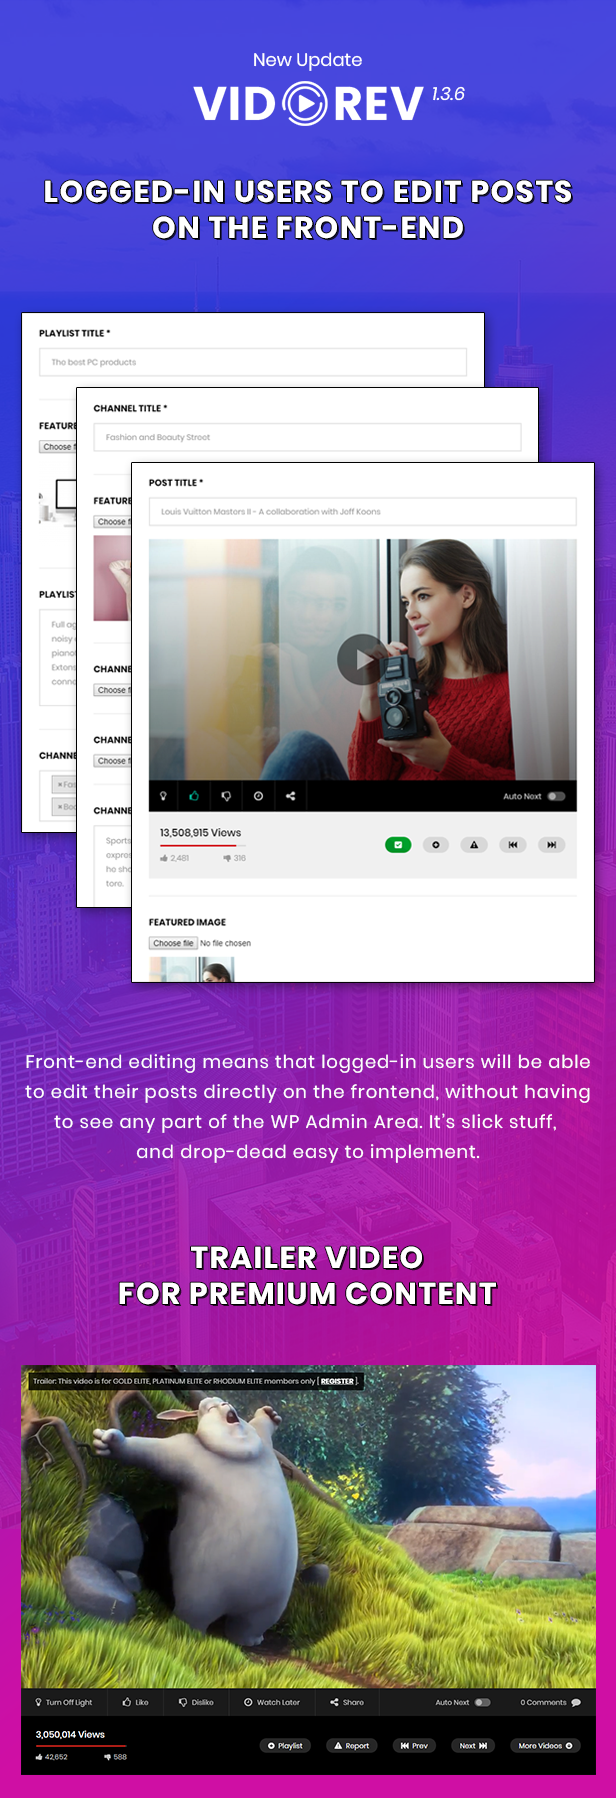 Pages with video plug-in.